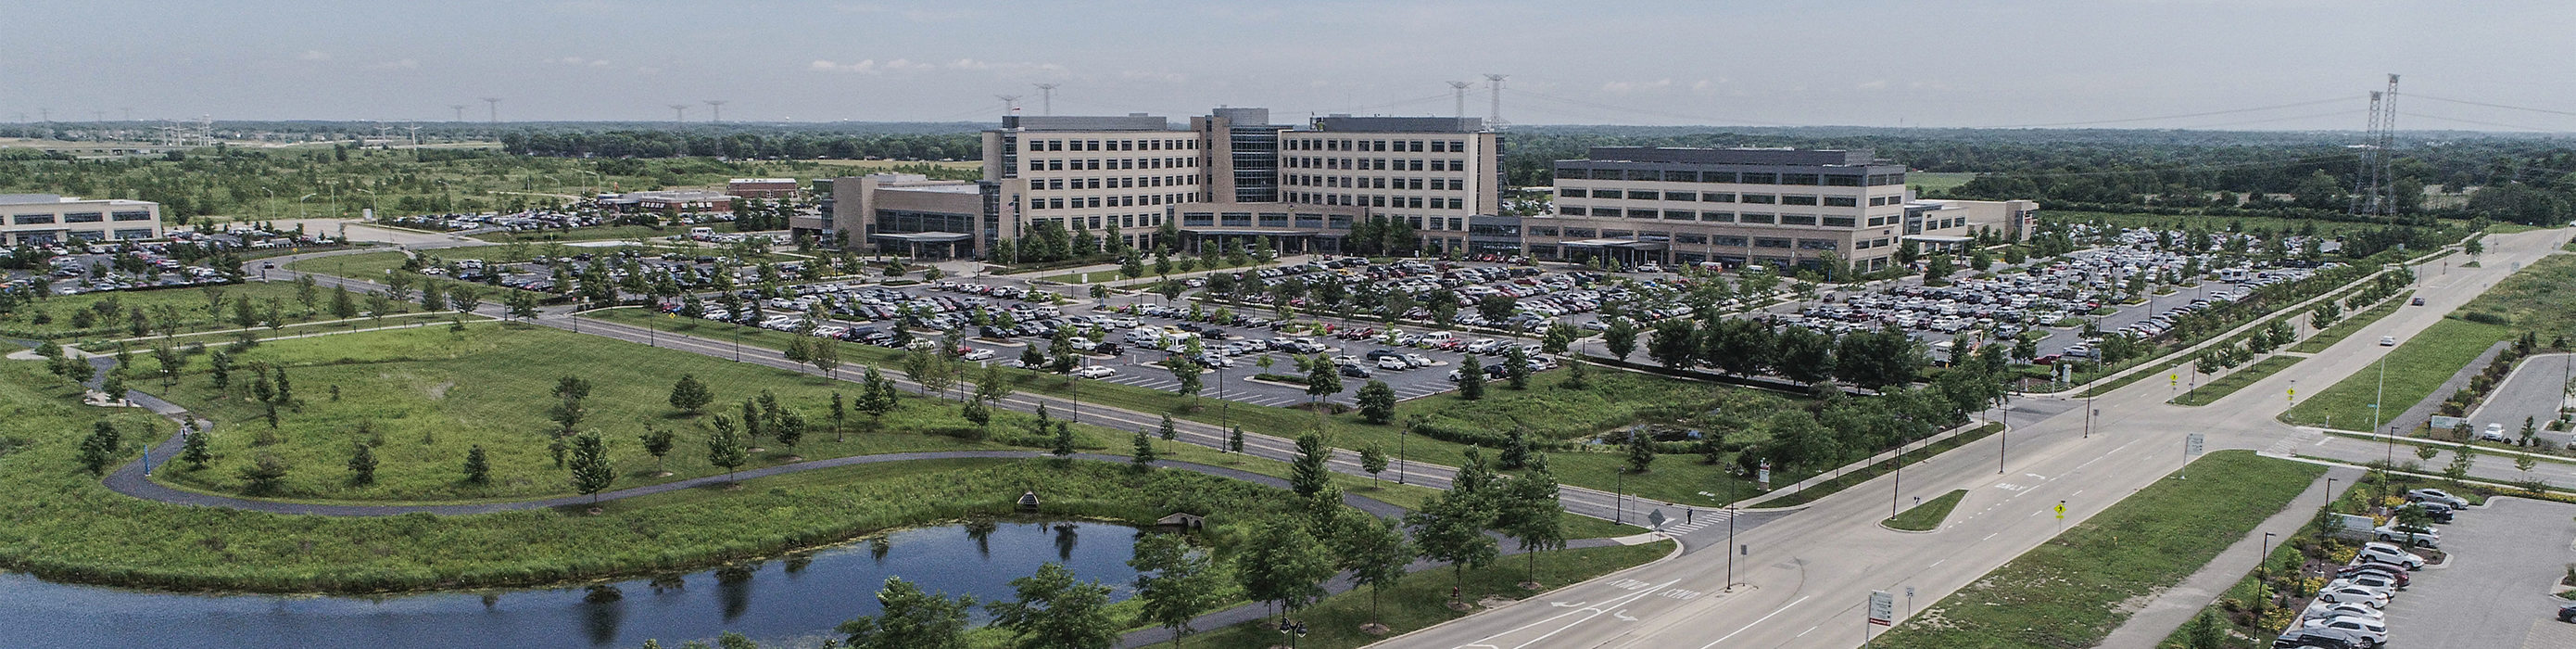 A large hospital campus.